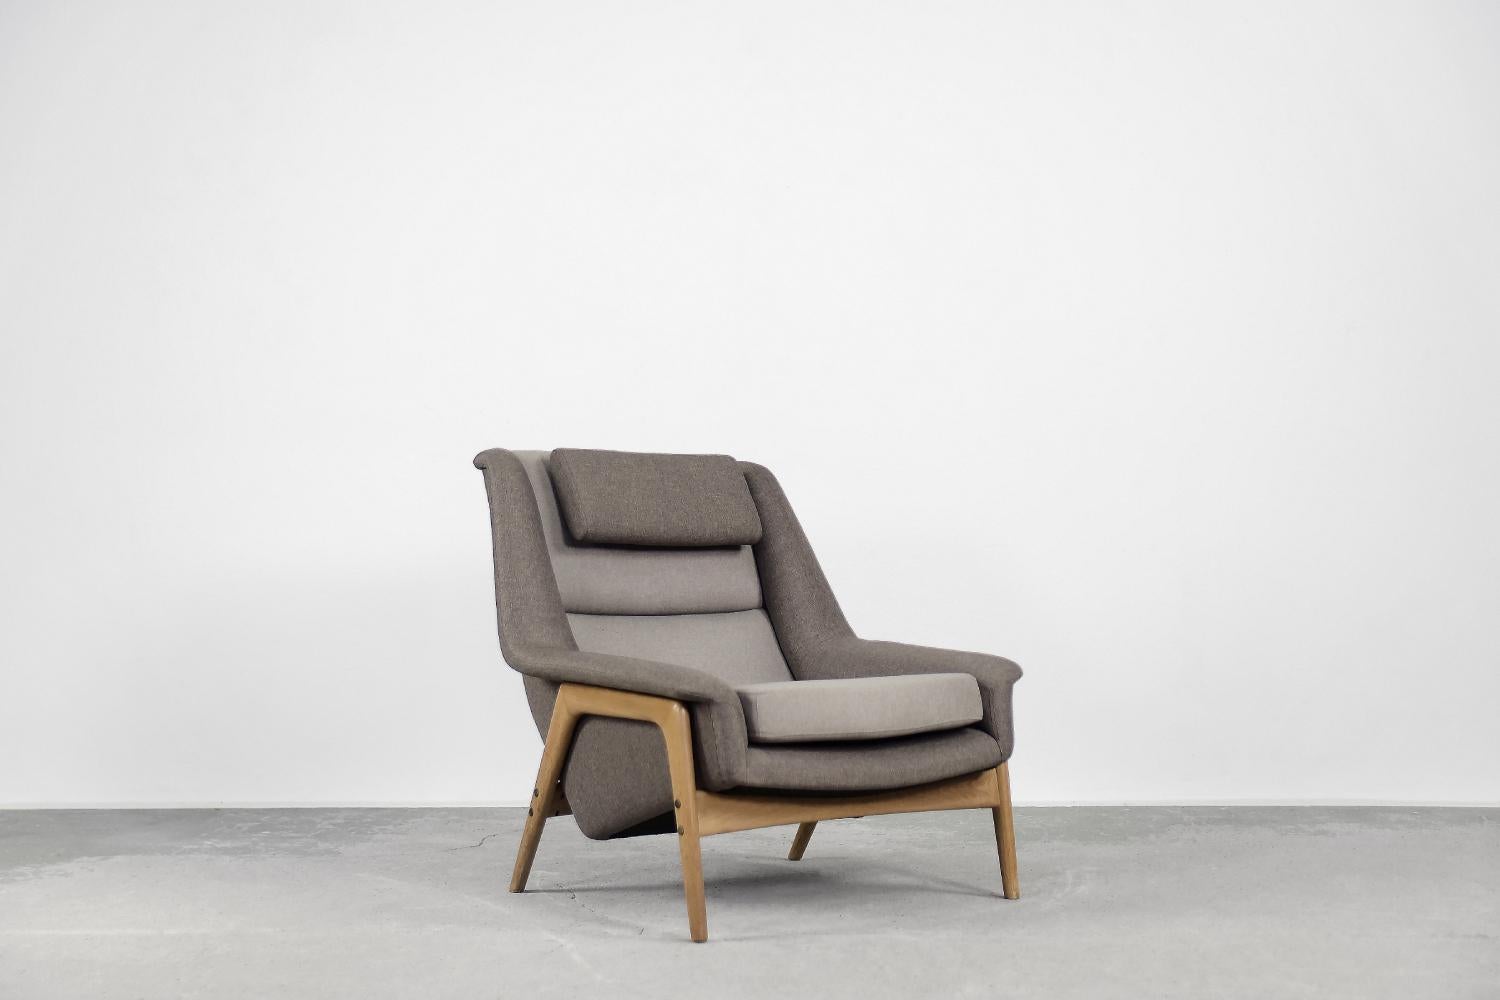 This modernist armchair was designed by Folke Ohlsson for the Swedish manufacture Dux, Ljungs Industrier AB during the 1960s. The frame of the armchair was made of solid beech wood. The high backrest, spacious seat and armrests have been profiled.